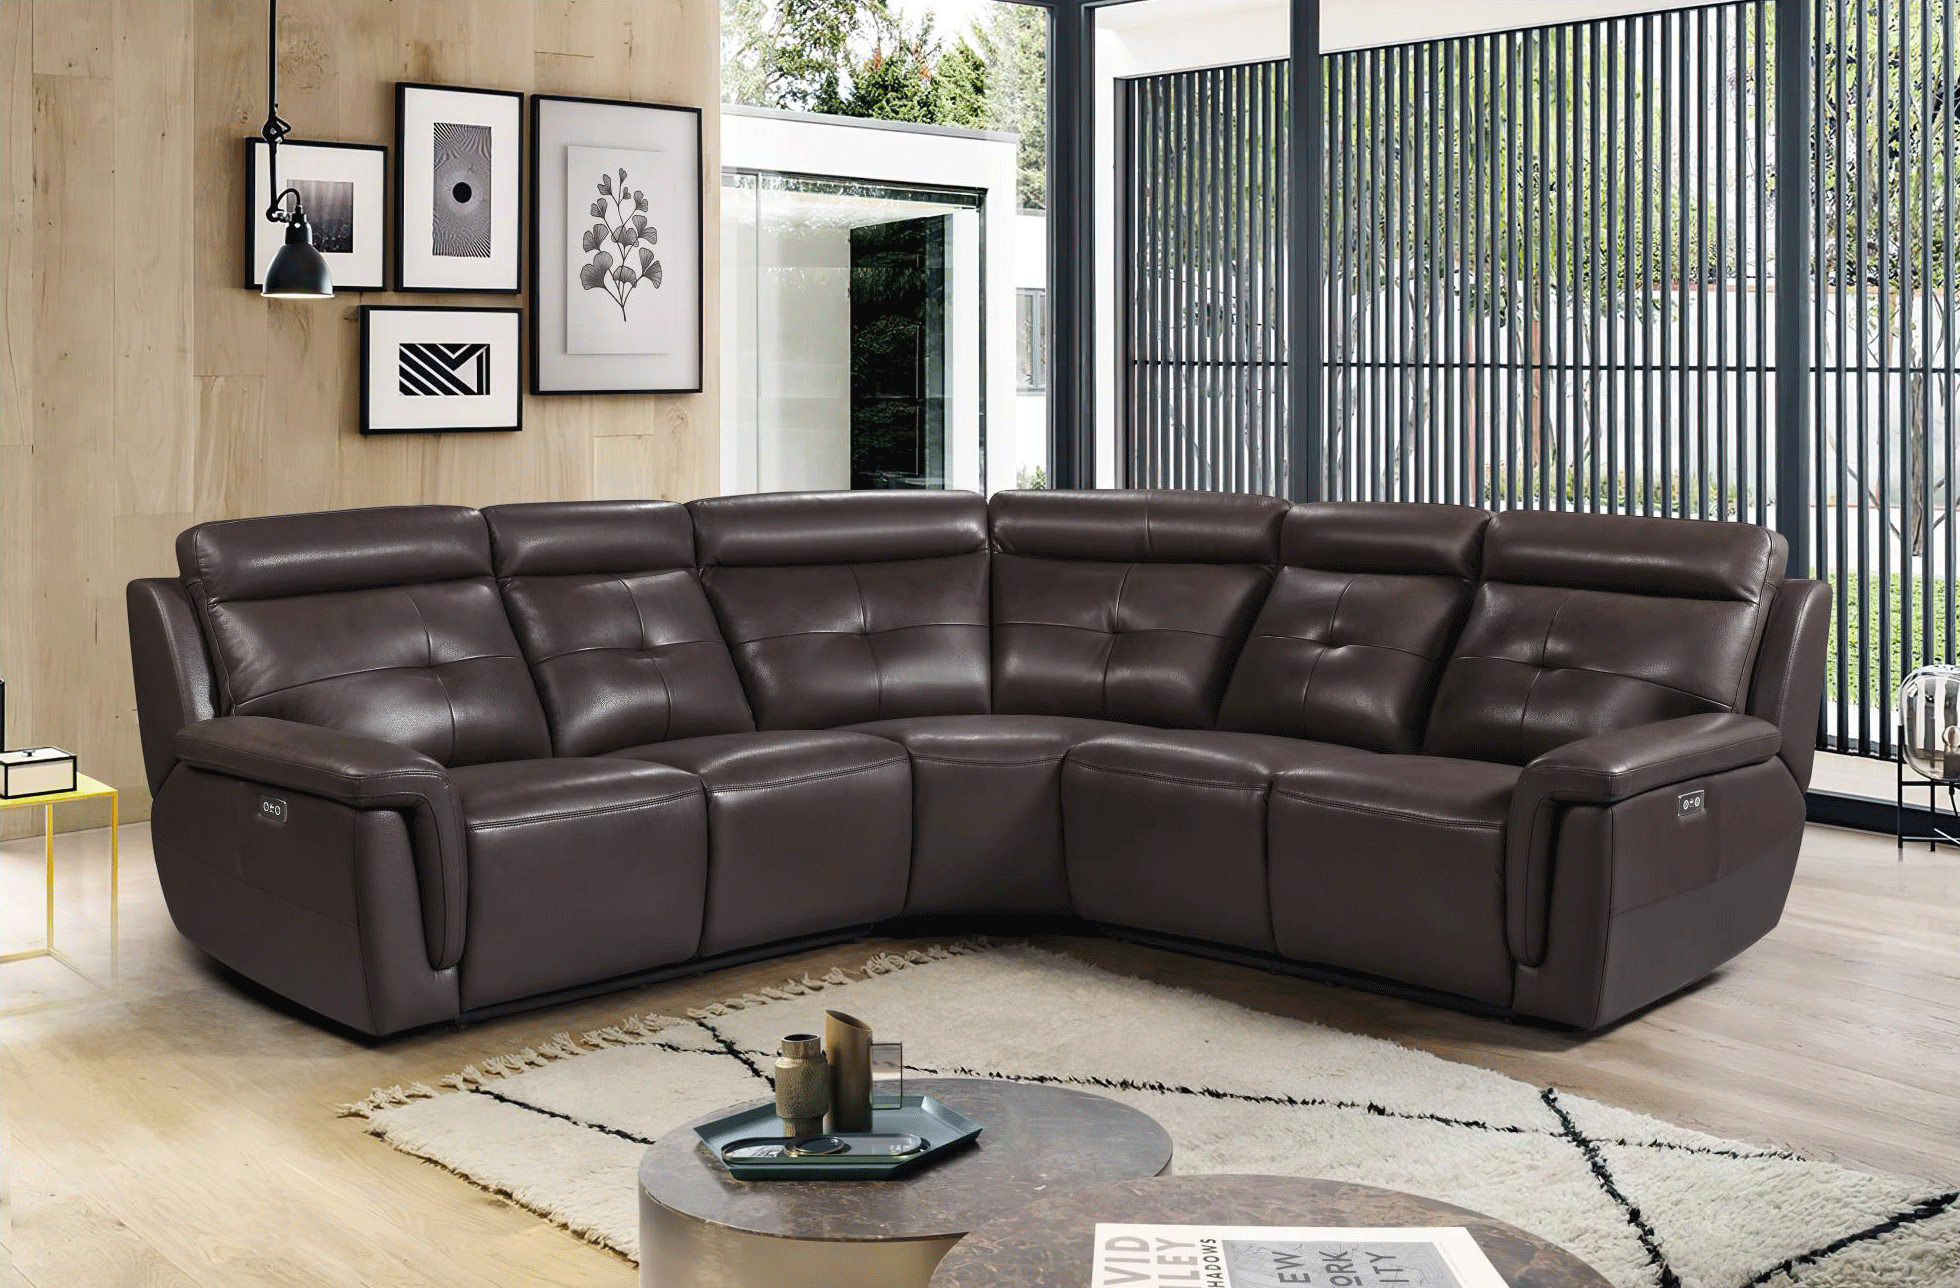 Brands SWH Classic Living Special Order 2937 Sectional w/ electric recliners